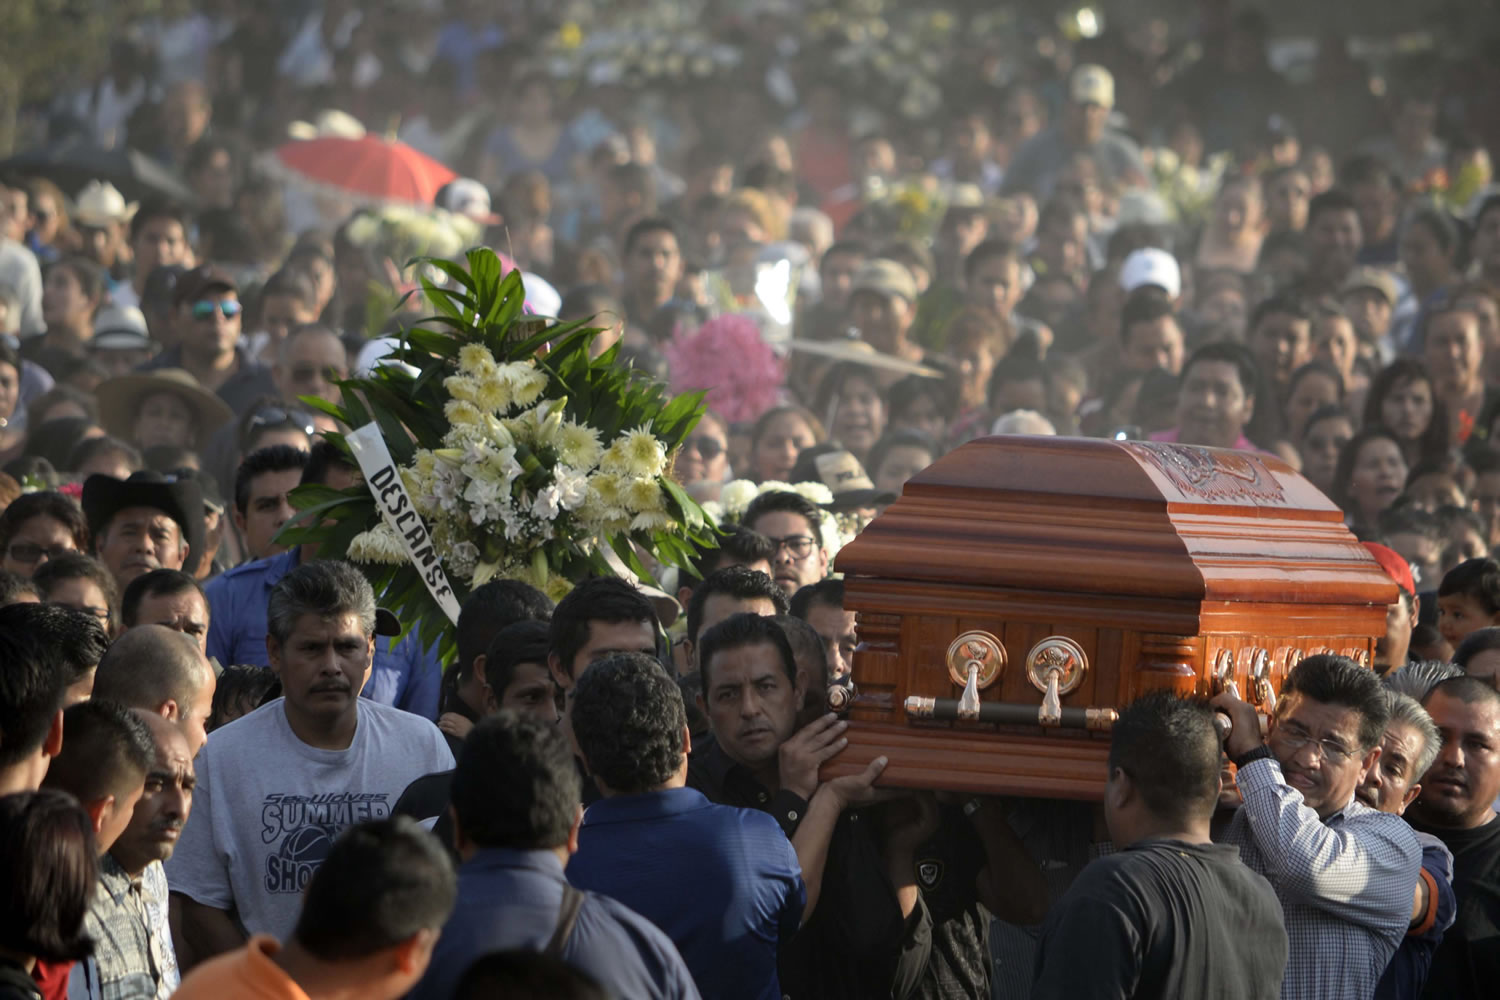 Mourners carry the coffin of slain mayor of Temixco, Gisela Mota, to the cemetery in Pueblo Viejo, Mexico, Sunday, Jan. 3, 2016. Mota took office as mayor of the city of on Jan. 1 and was shot at her home on Jan. 2. The governor of the southern Mexican state of Morelos says the killing of the mayor was a warning by drug gangs, meant to convince other officials to reject state police control of local forces.